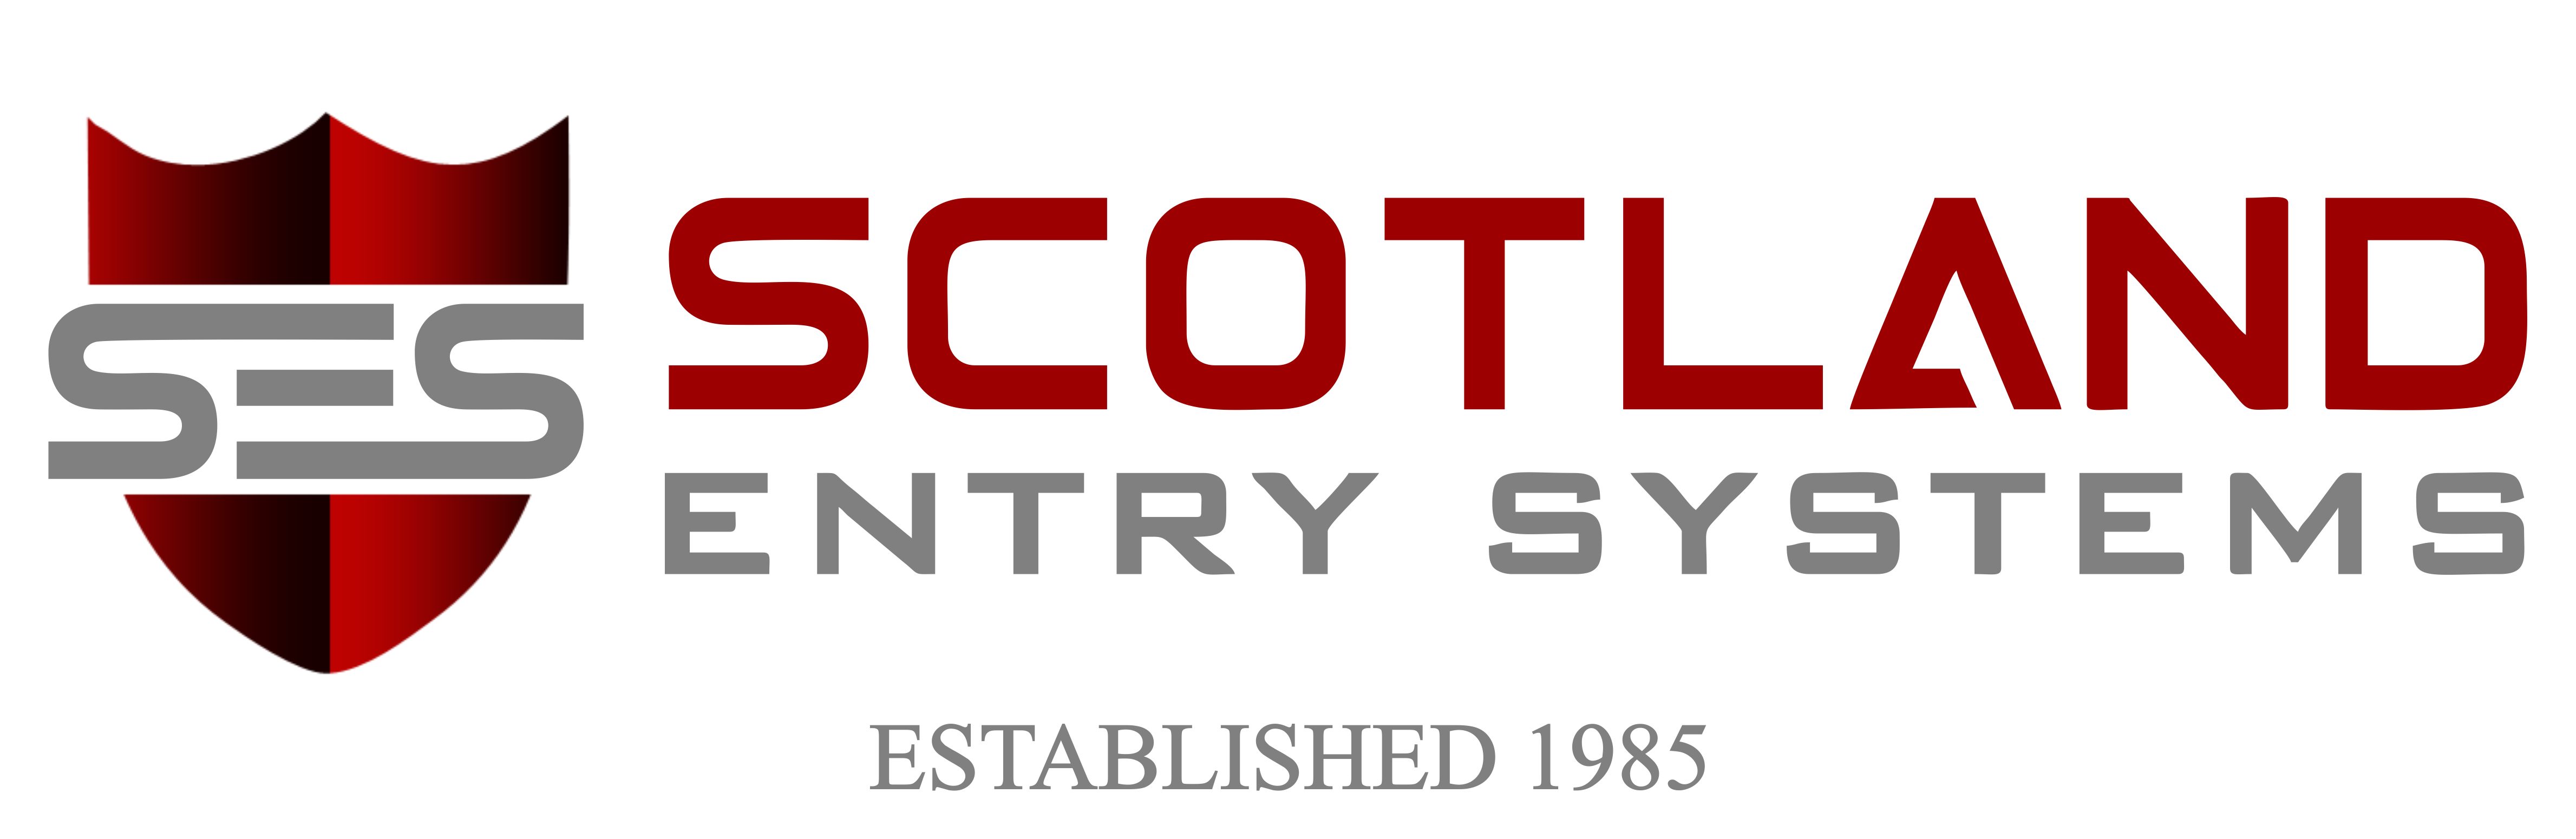 Scotland Entry Systems